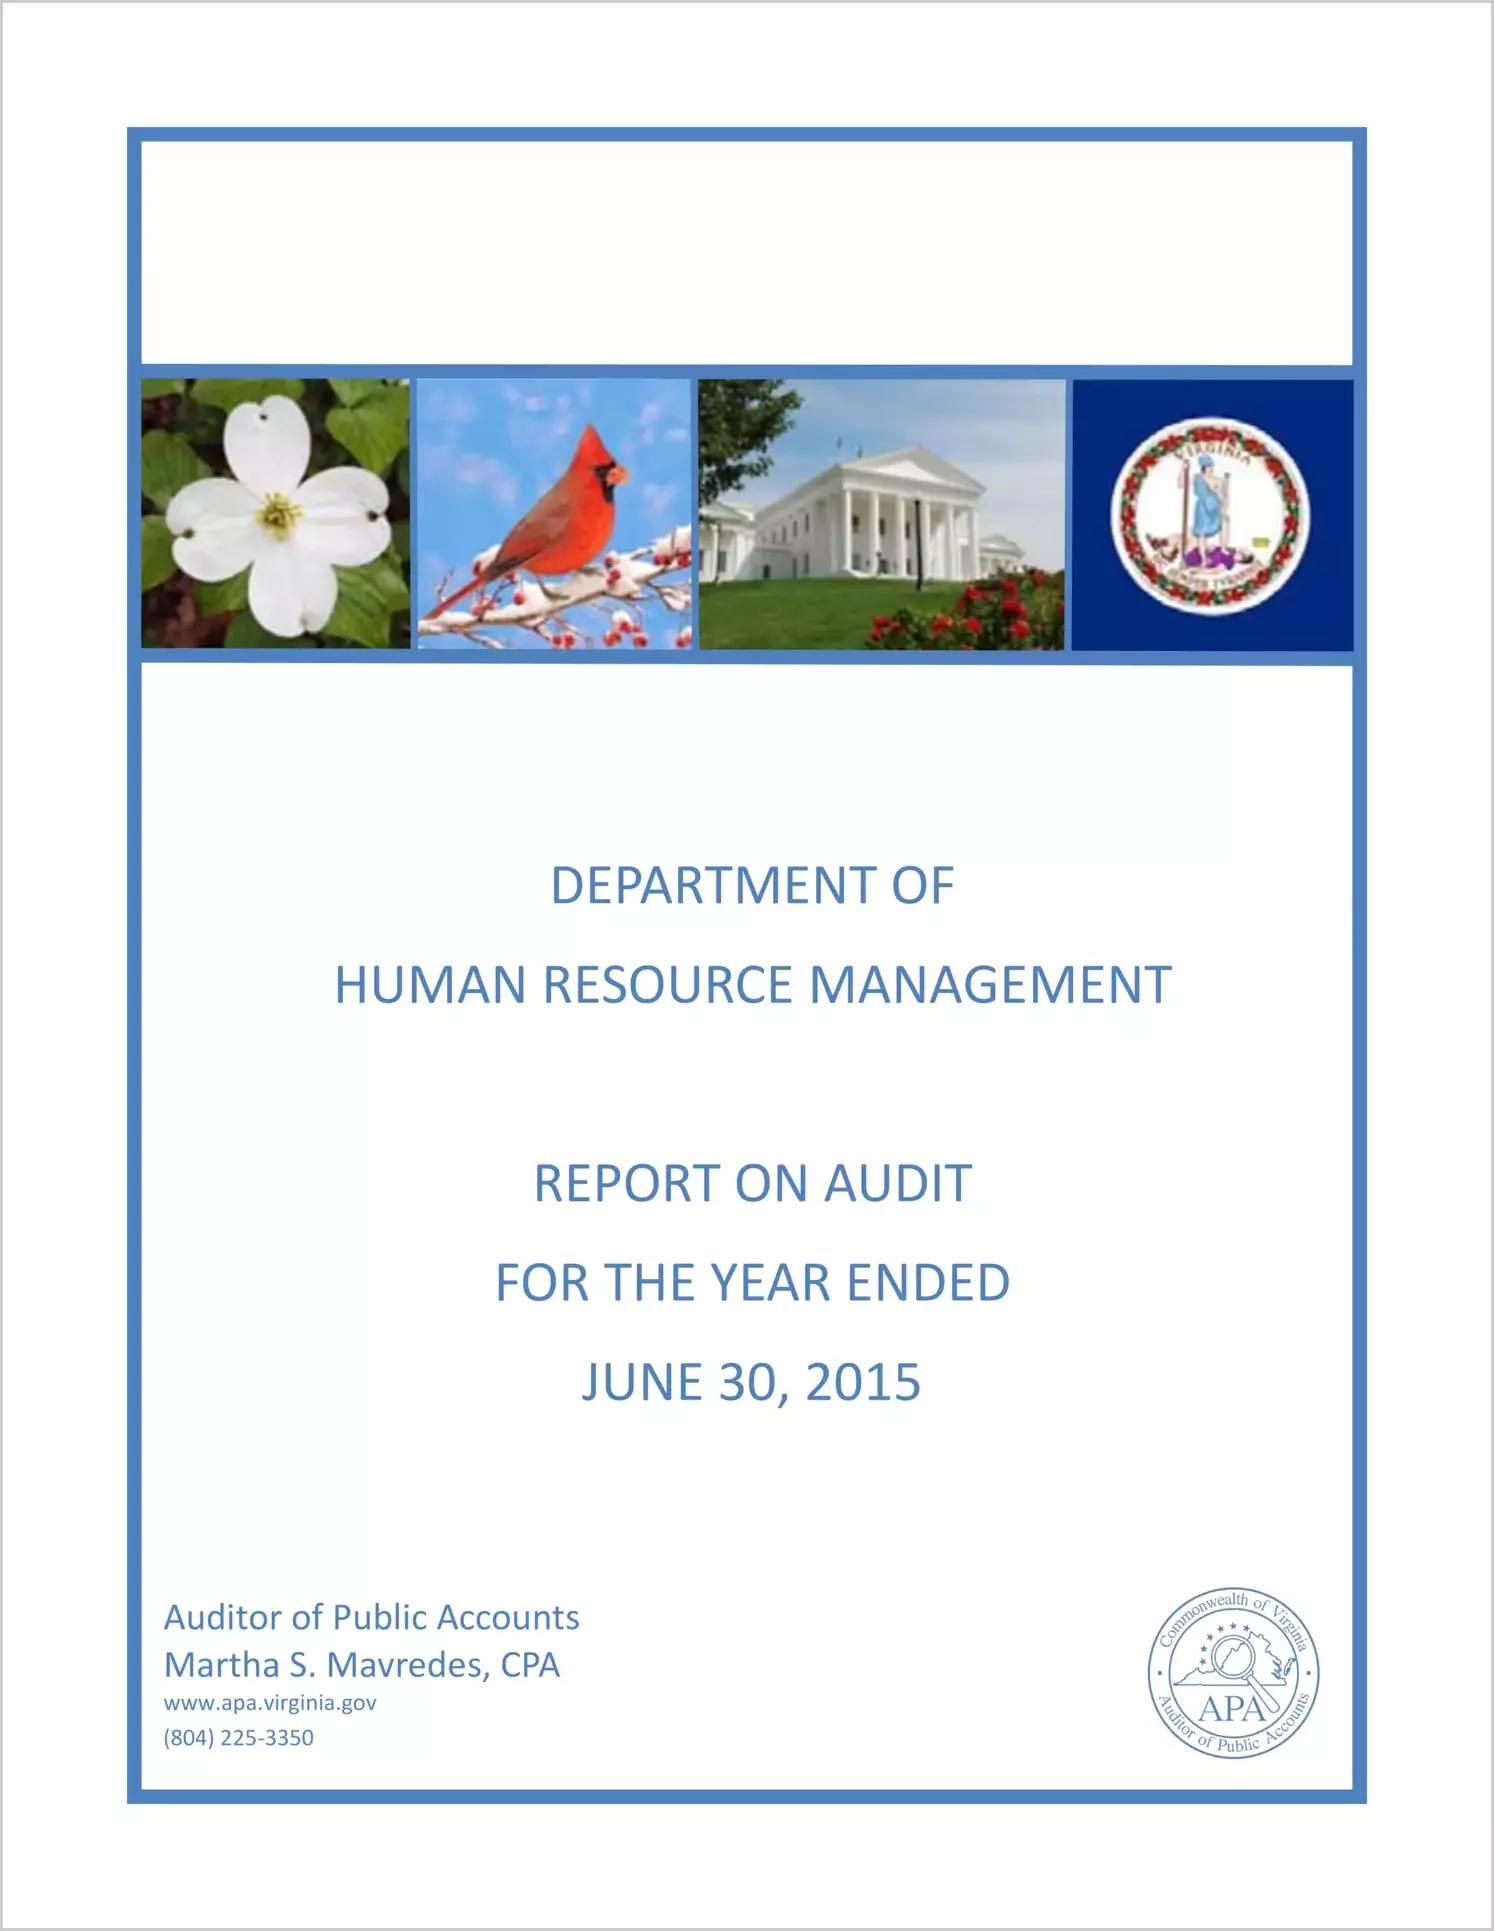 Department of Human Resource Management for the fiscal year ended June 30, 2015